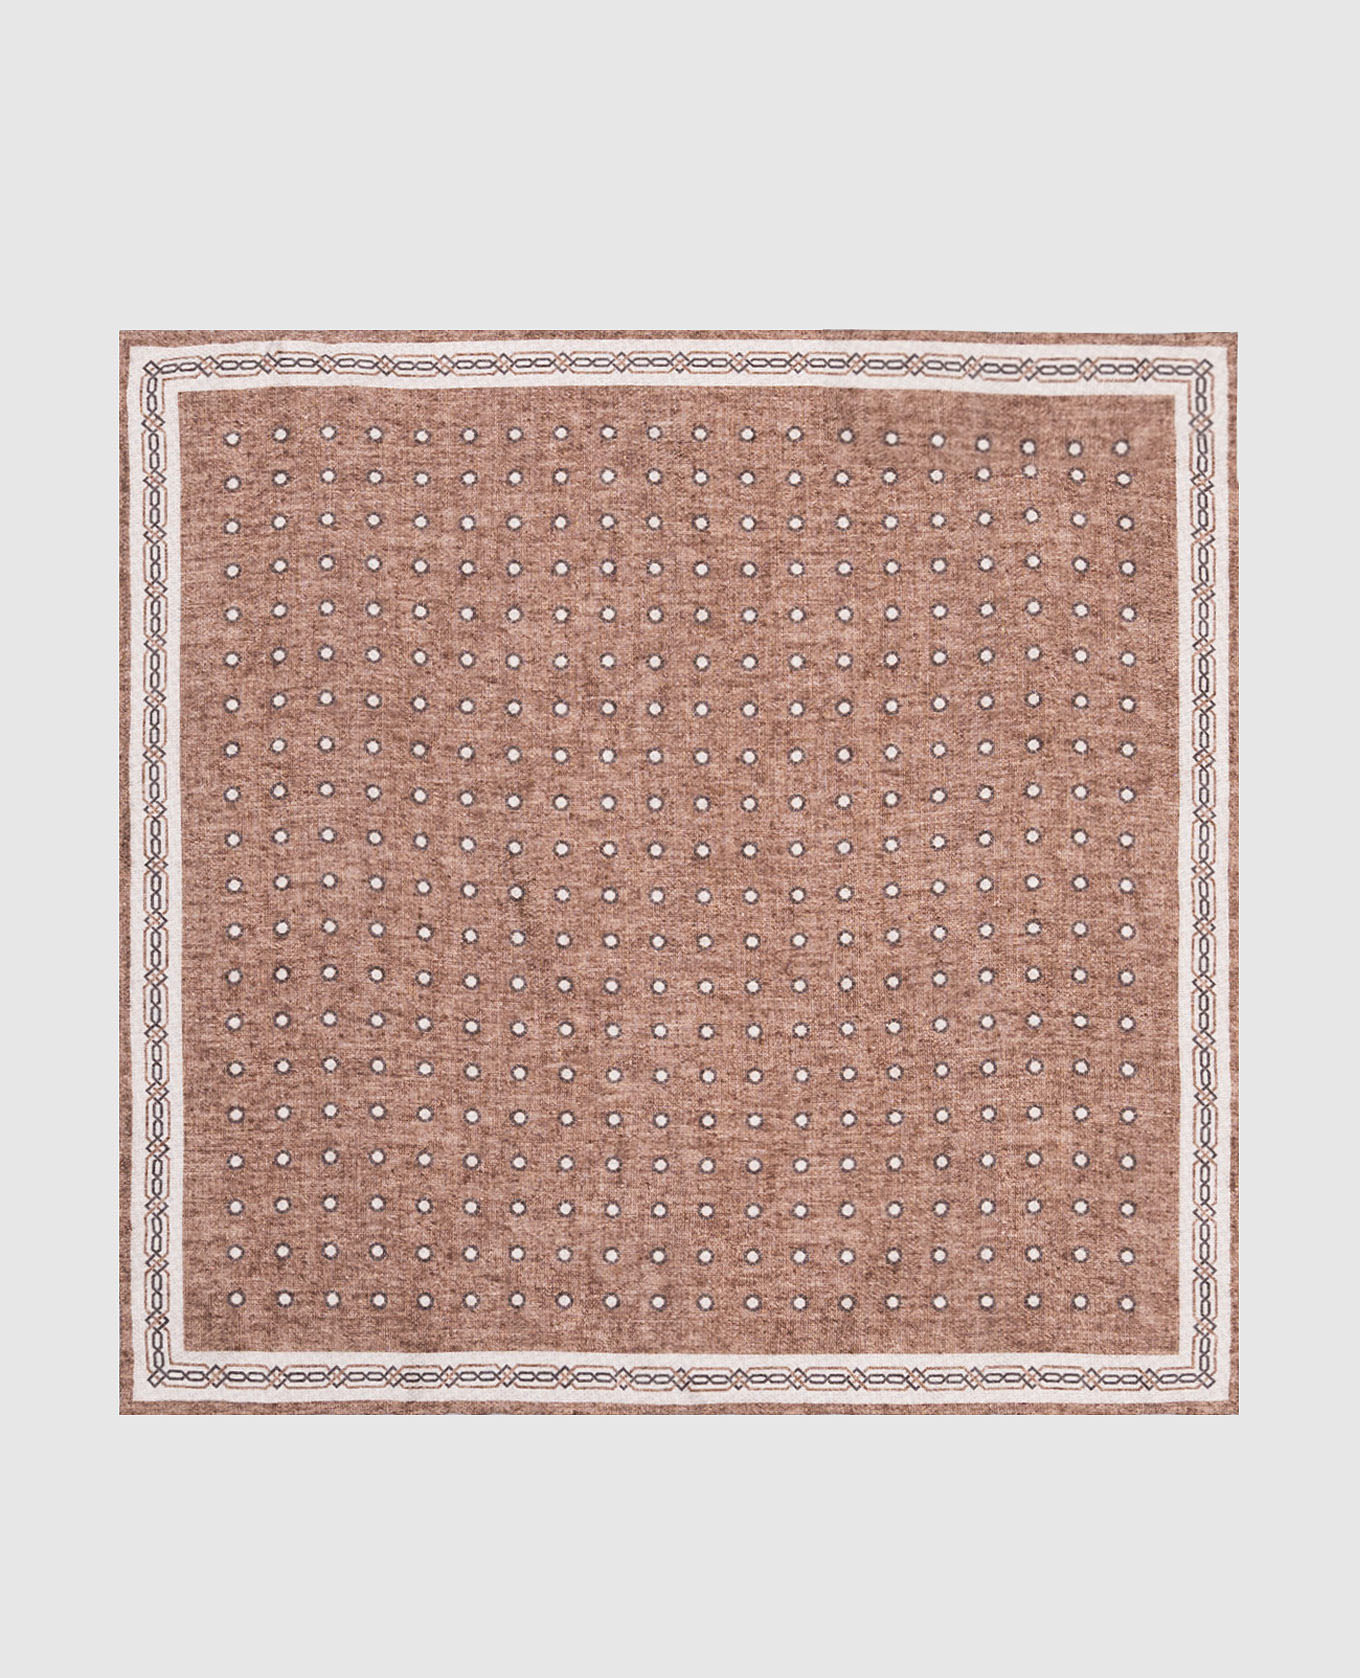 Brown double-sided pache scarf made of silk in a geometric pattern